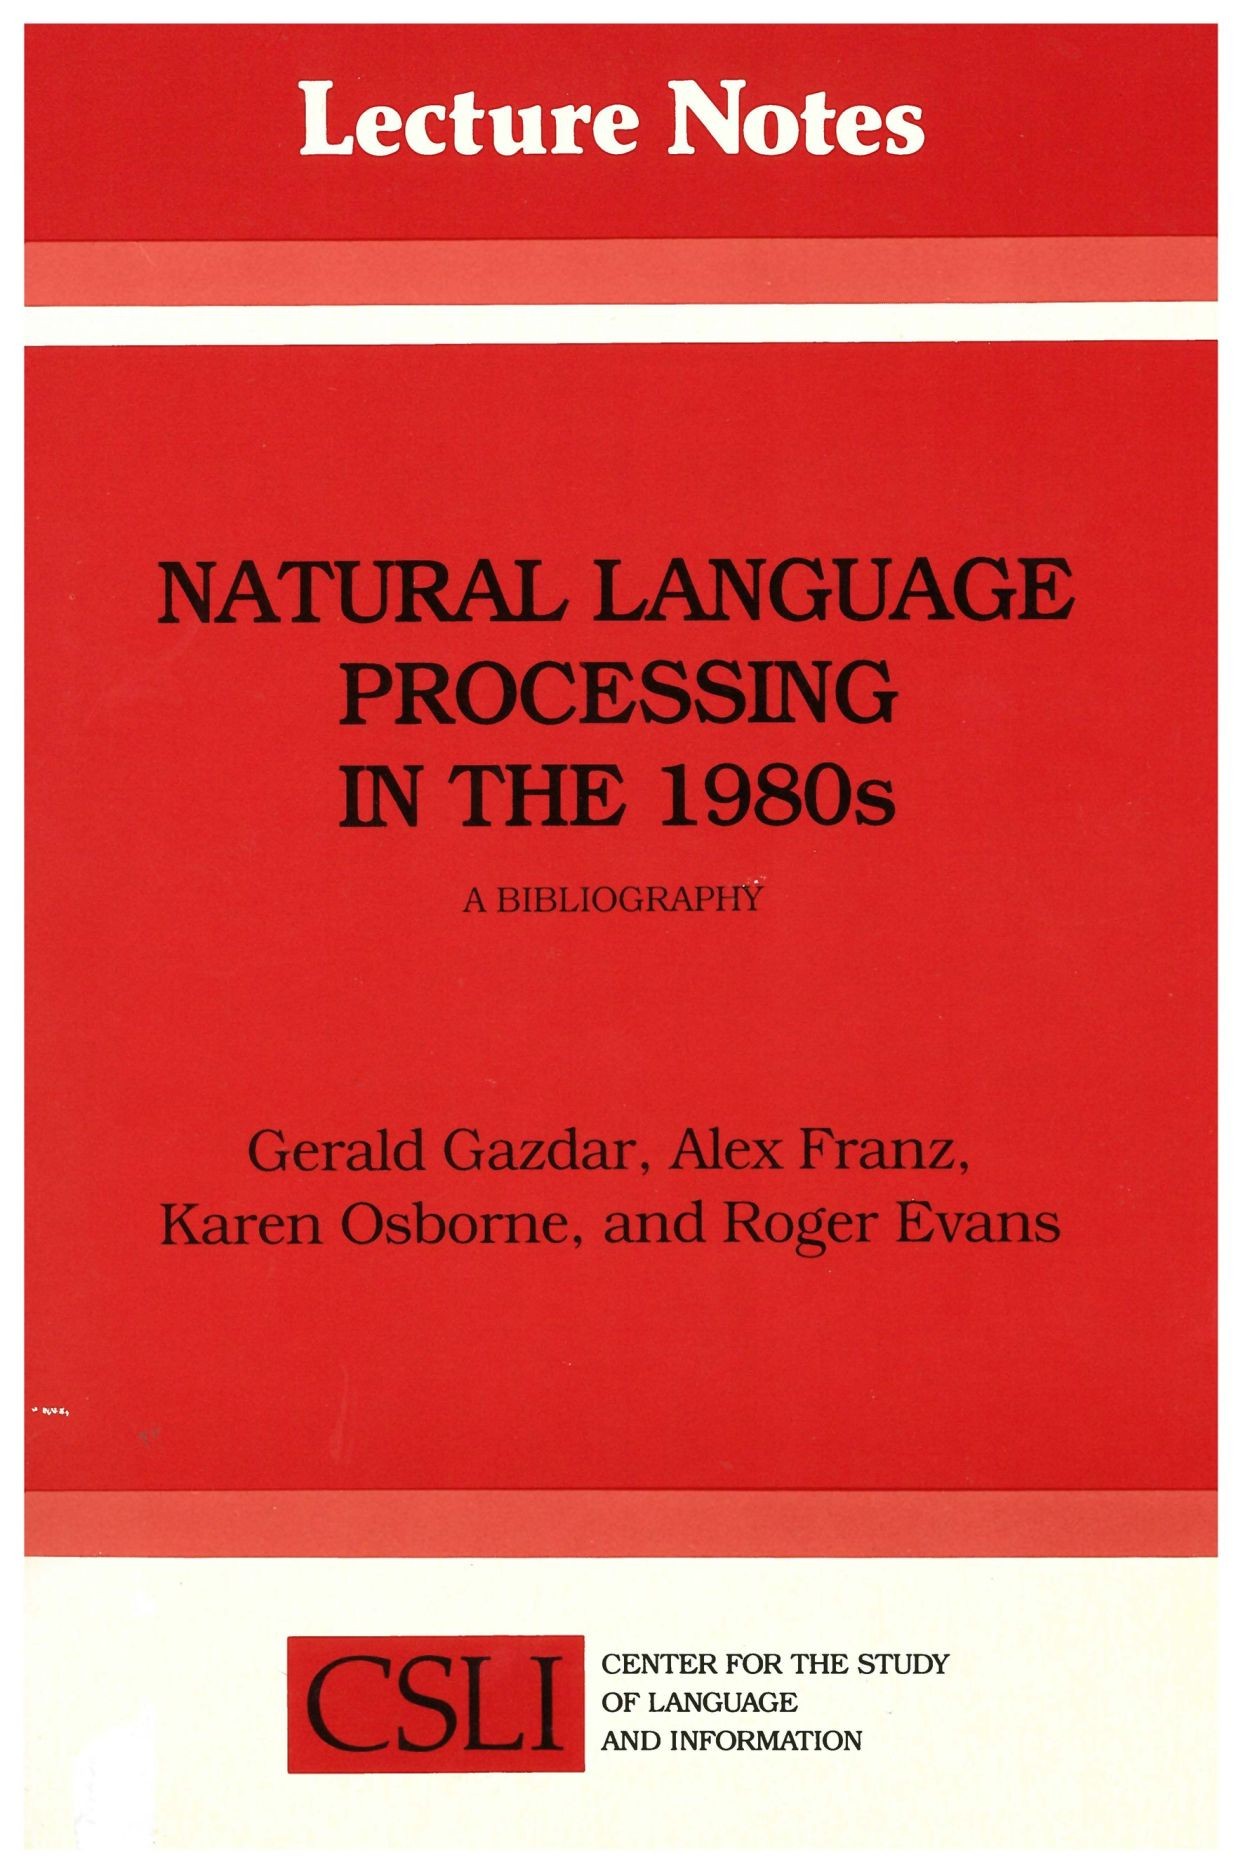 Natural Language Processing in the 1980s: A Bibliography